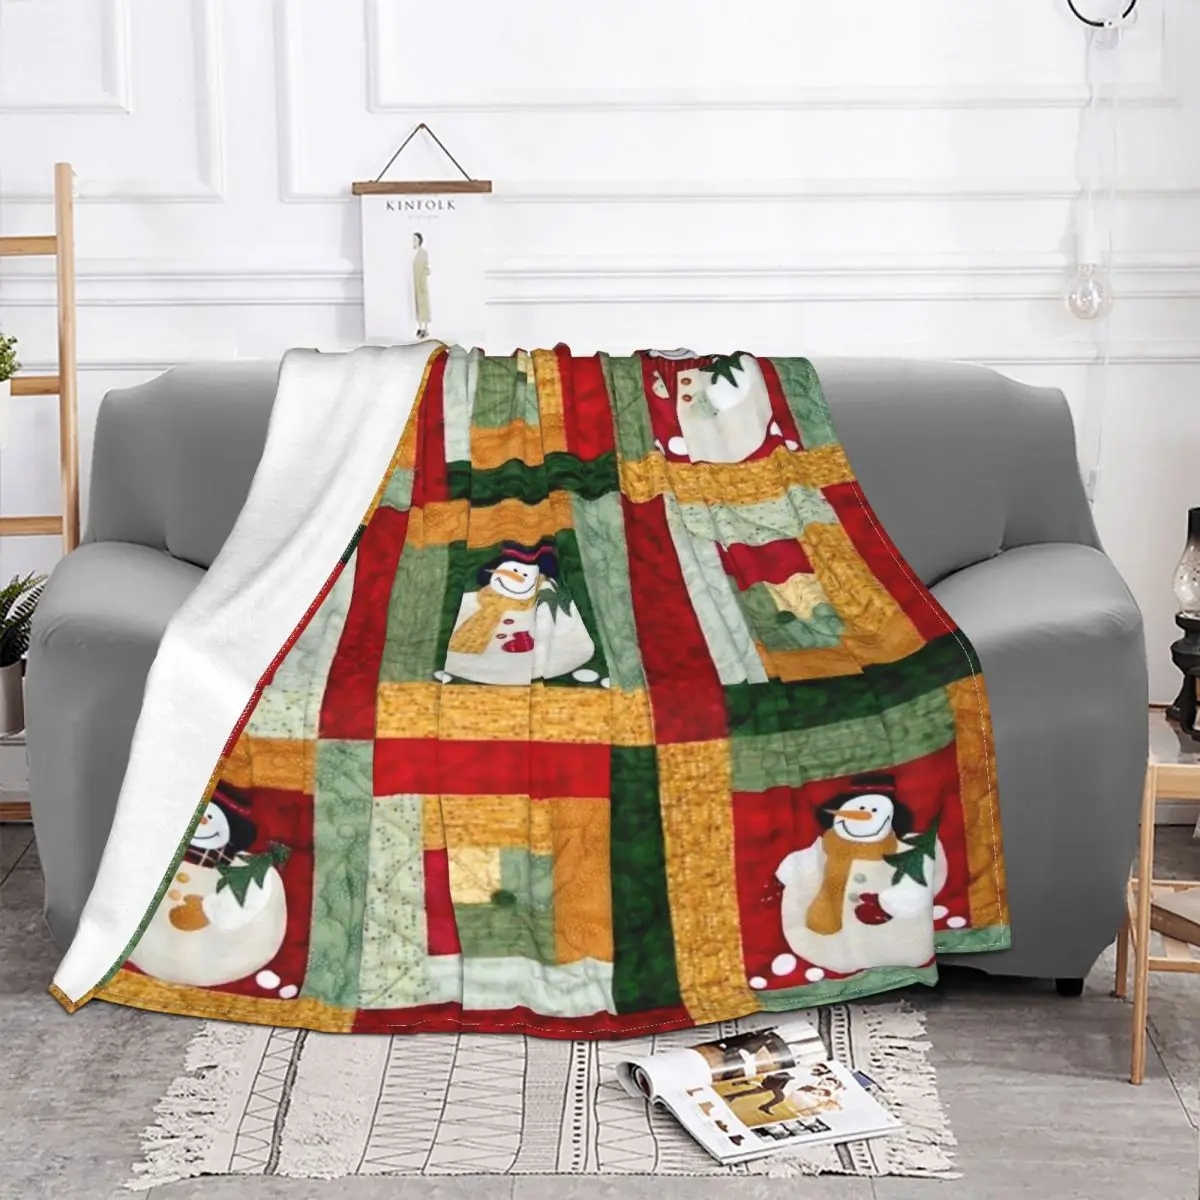 

Christmas Santa Gnome Plaid Blanket Fleece Summer Multifunction Lightweight Throw Blankets for Bed Couch Quilt